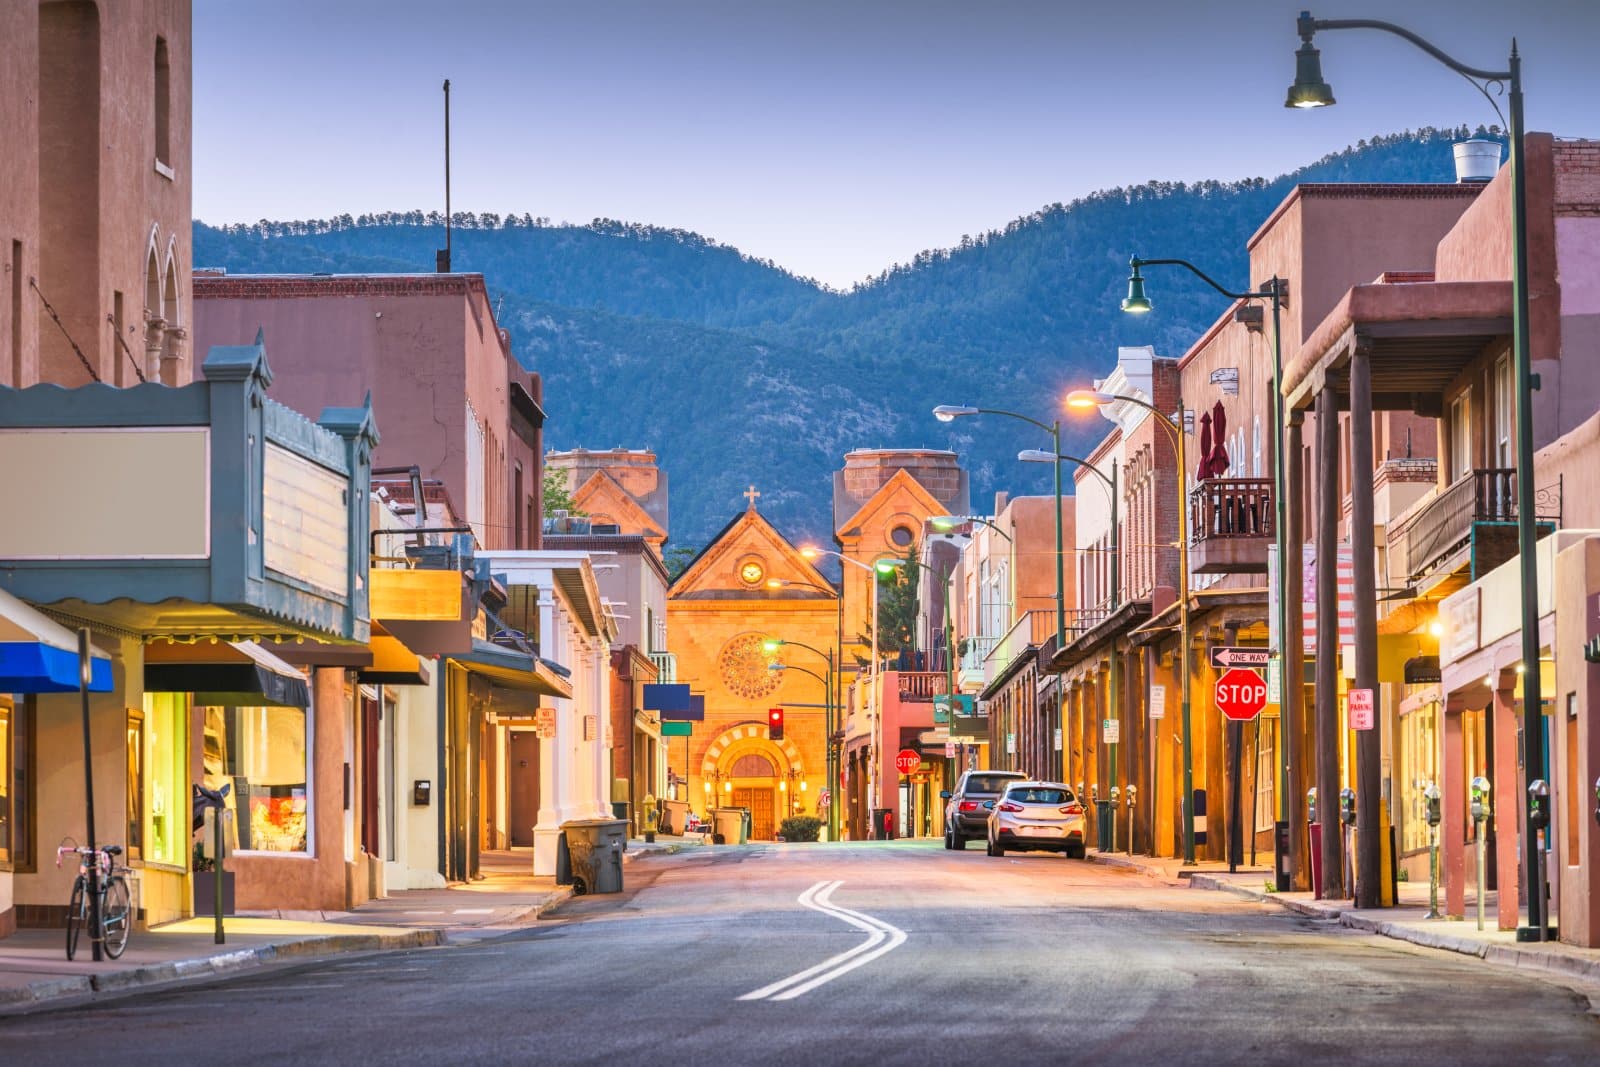 <p><span>New Mexico’s population decline is driven by factors such as limited economic opportunities, high poverty rates, and concerns about crime and public safety, prompting residents to explore new opportunities elsewhere.</span></p>